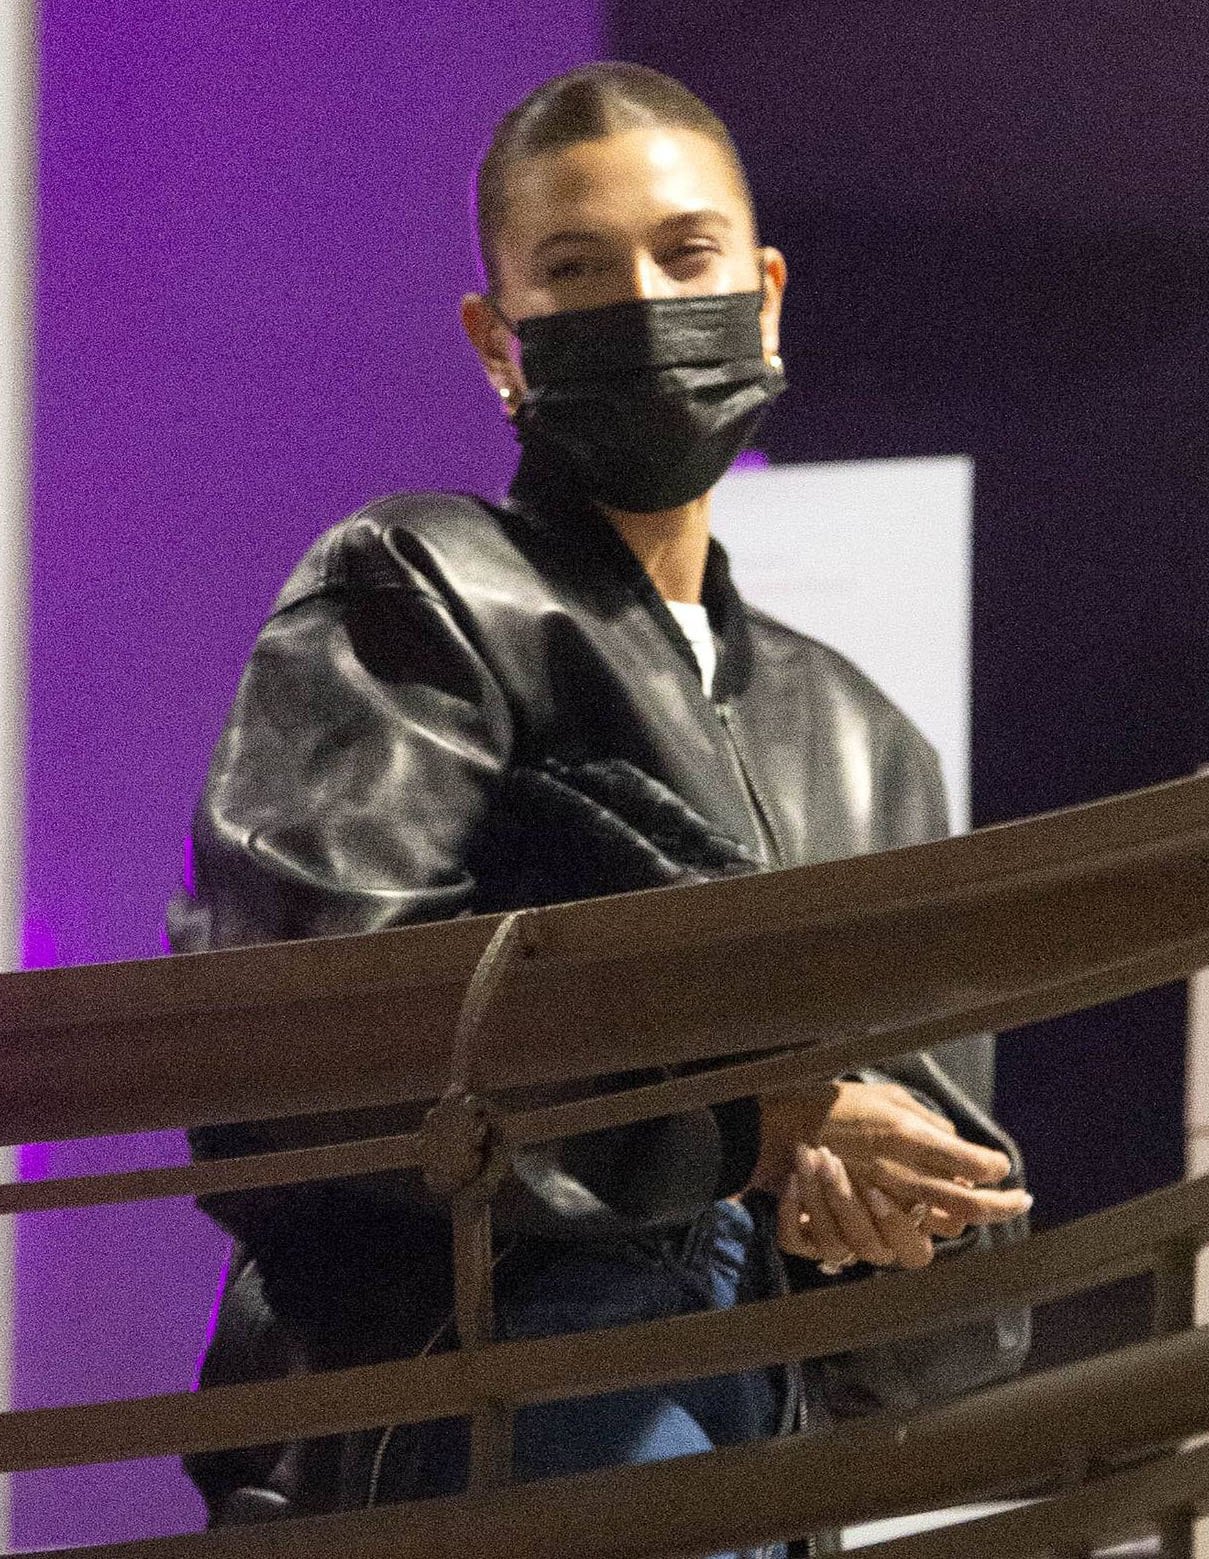 Hailey Bieber wears her signature sleek bun hairstyle and covers her face with a black face mask